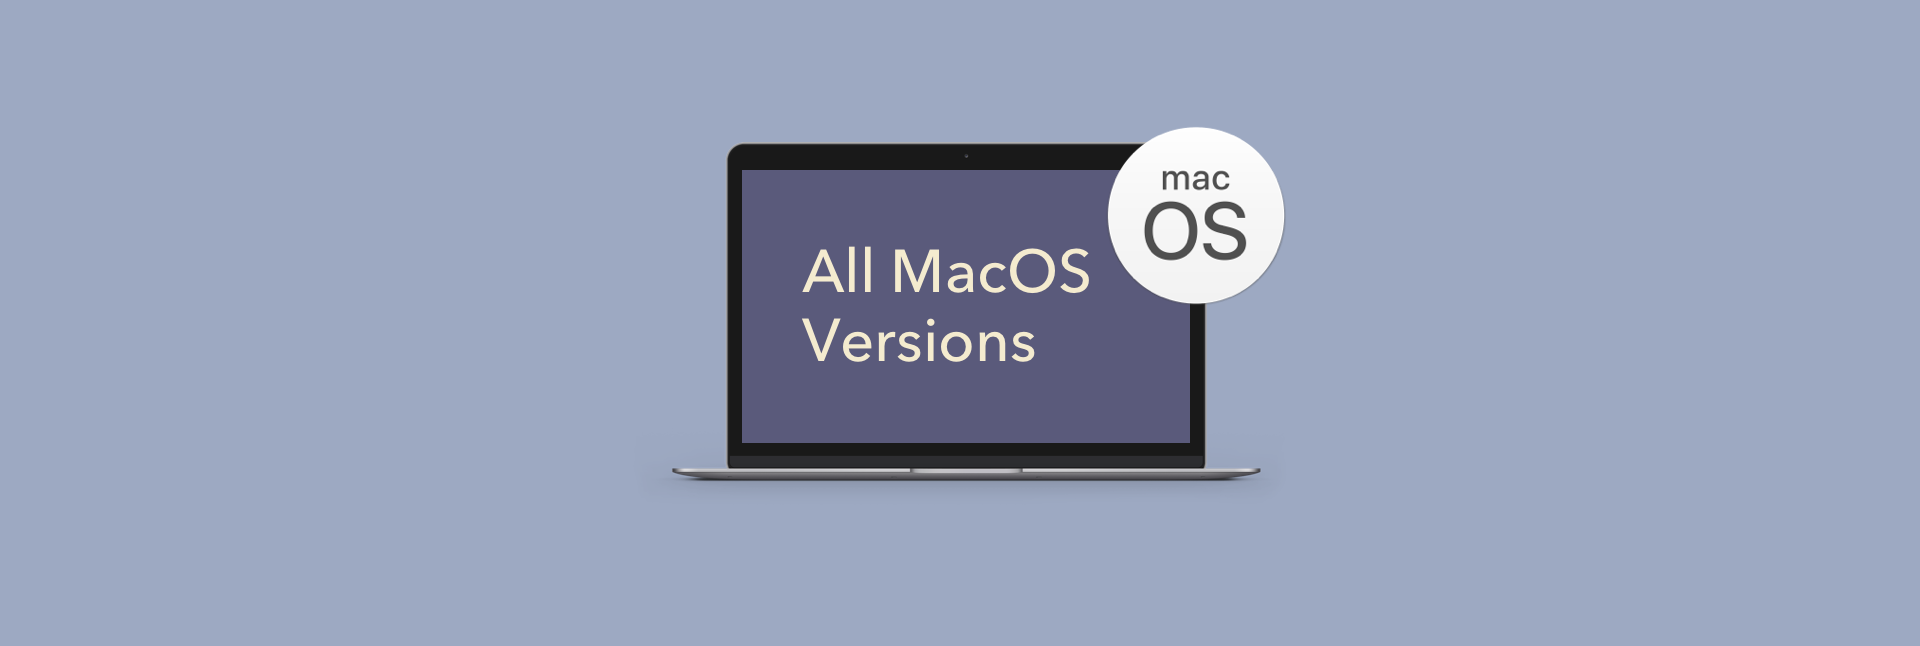 download os x 10.5 full for mac